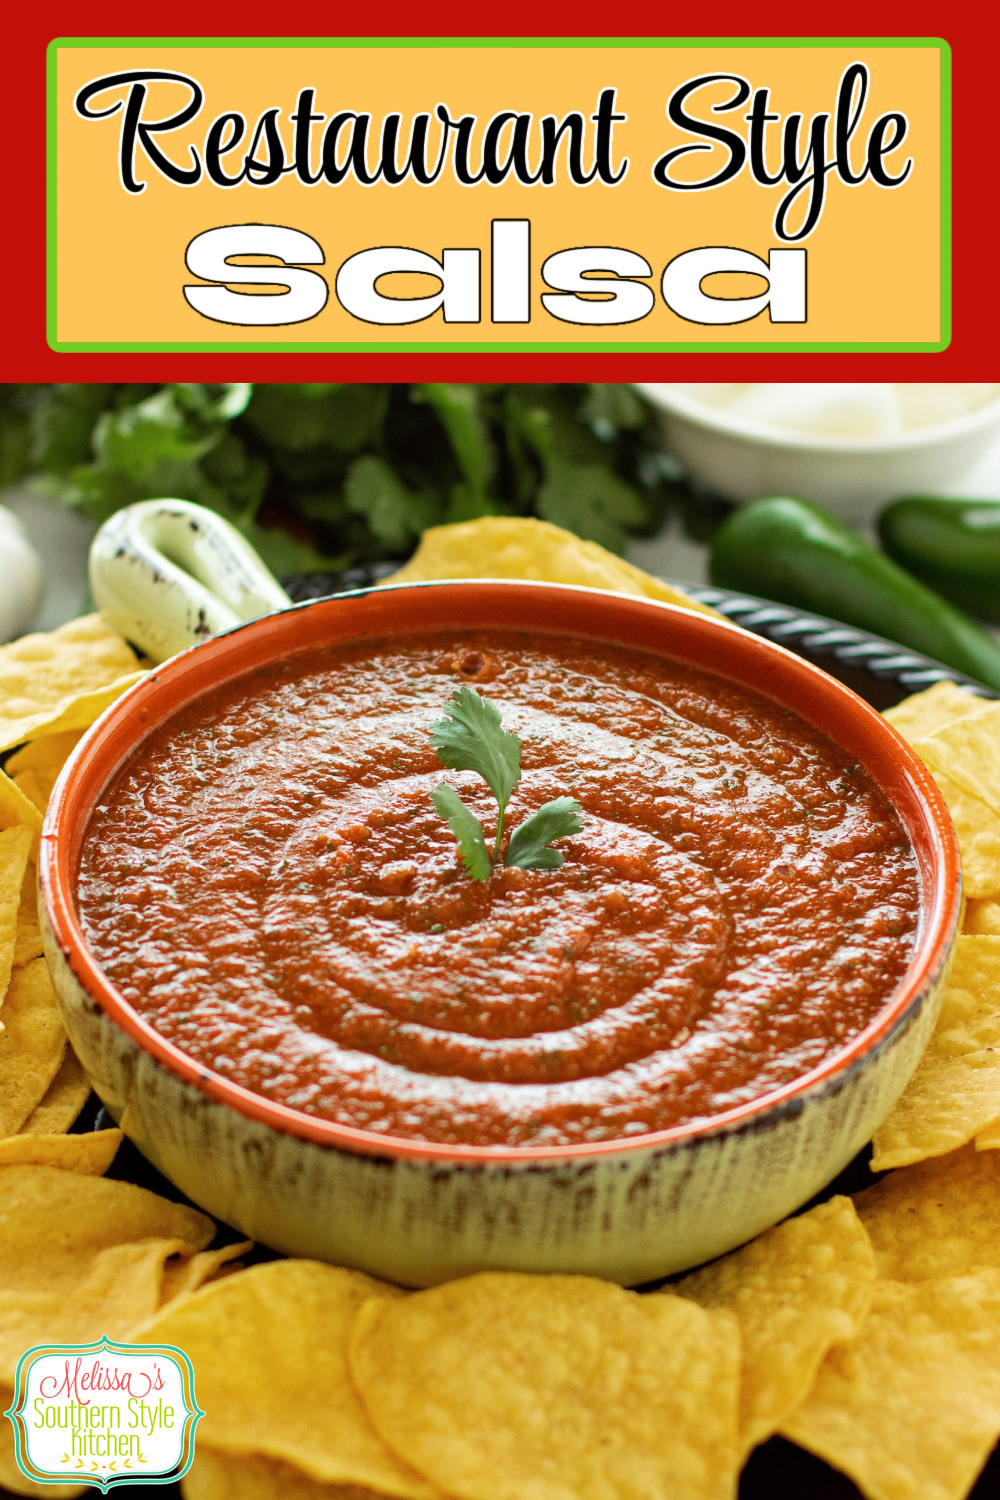 This Restaurant Style Salsa recipe can be served with tortilla chips or any of your Mexican favorites #salsa #restaurantsalsa #salsarecipes #easysalsarecipe #bestsalsarecipe #tomatosalsa via @melissasssk